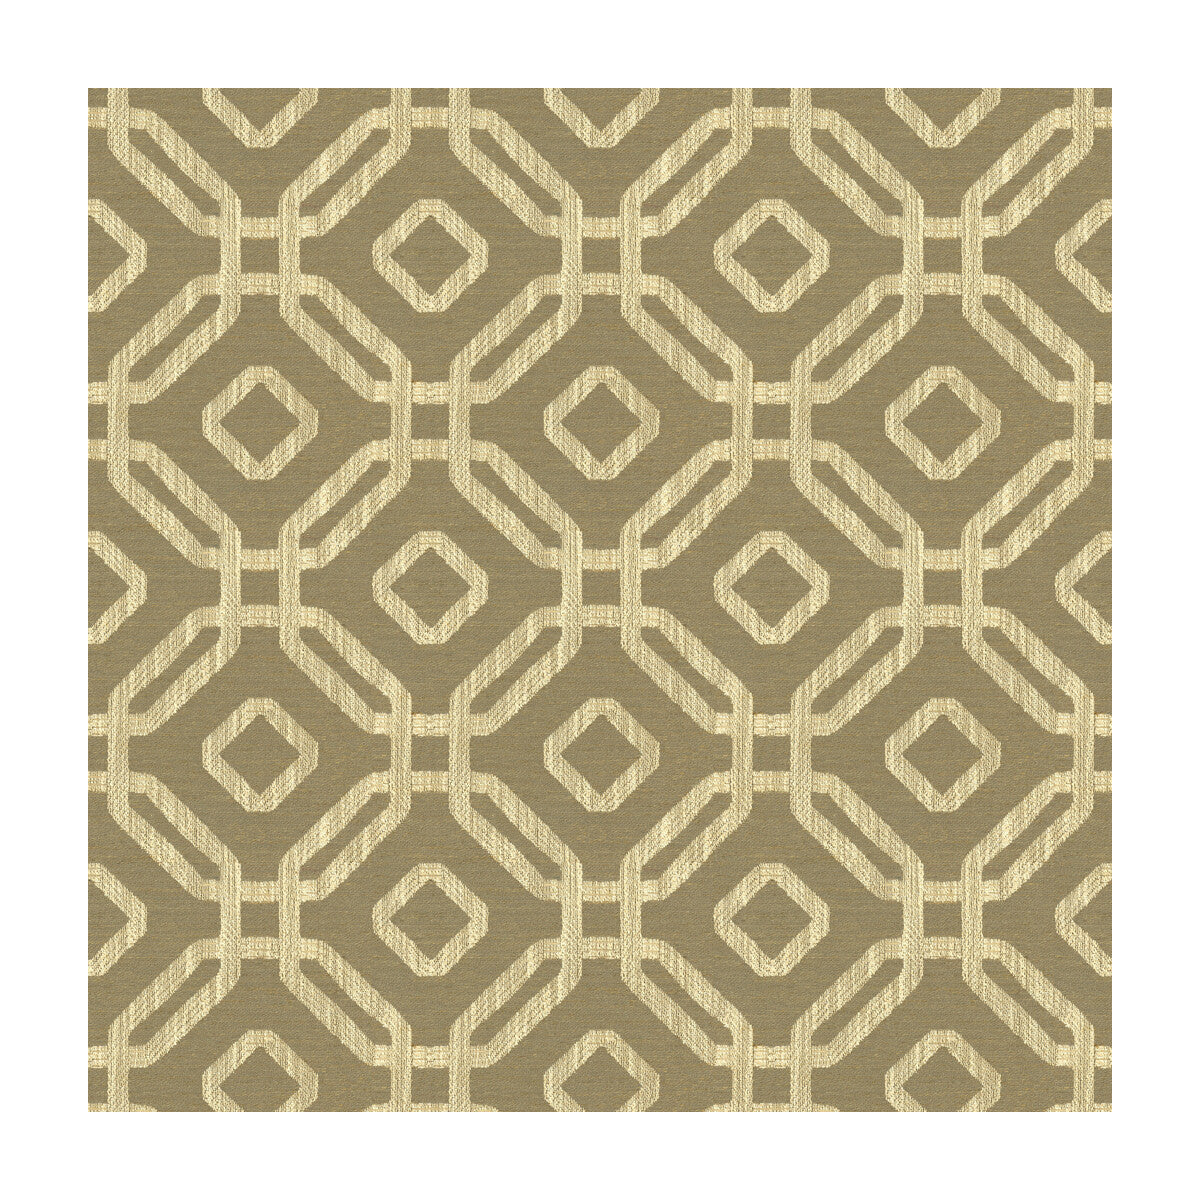 Hawthorn fabric in pebble color - pattern 34175.106.0 - by Kravet Design in the Candice Olson collection